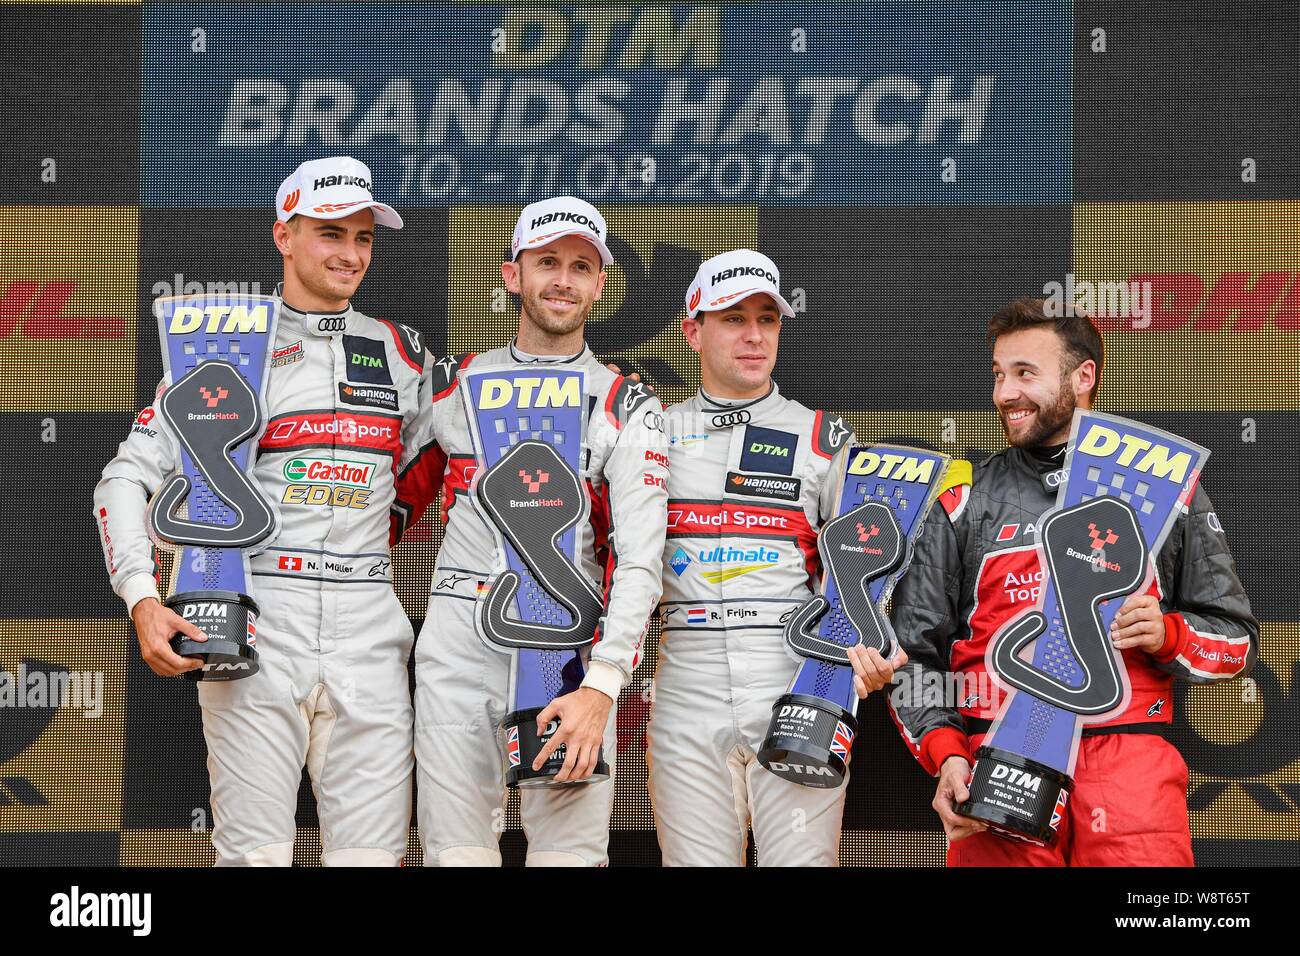 Kent, UK. 11th August 2019. René Rast (Audi Sport Team Rosberg) (centre), Nico Müller (Audi Sport Team Abt Sportsline) (left) and Robin Frijns (Audi Sport Team Abt Sportsline)  (right) at the winner’s presentation during DTM Race 2 of the DTM (German Touring Cars) and W Series at Brands Hatch GP Circuit on Sunday, August 11, 2019 in KENT, ENGLAND. Credit: Taka G Wu/Alamy Live News Credit: Taka Wu/Alamy Live News Stock Photo